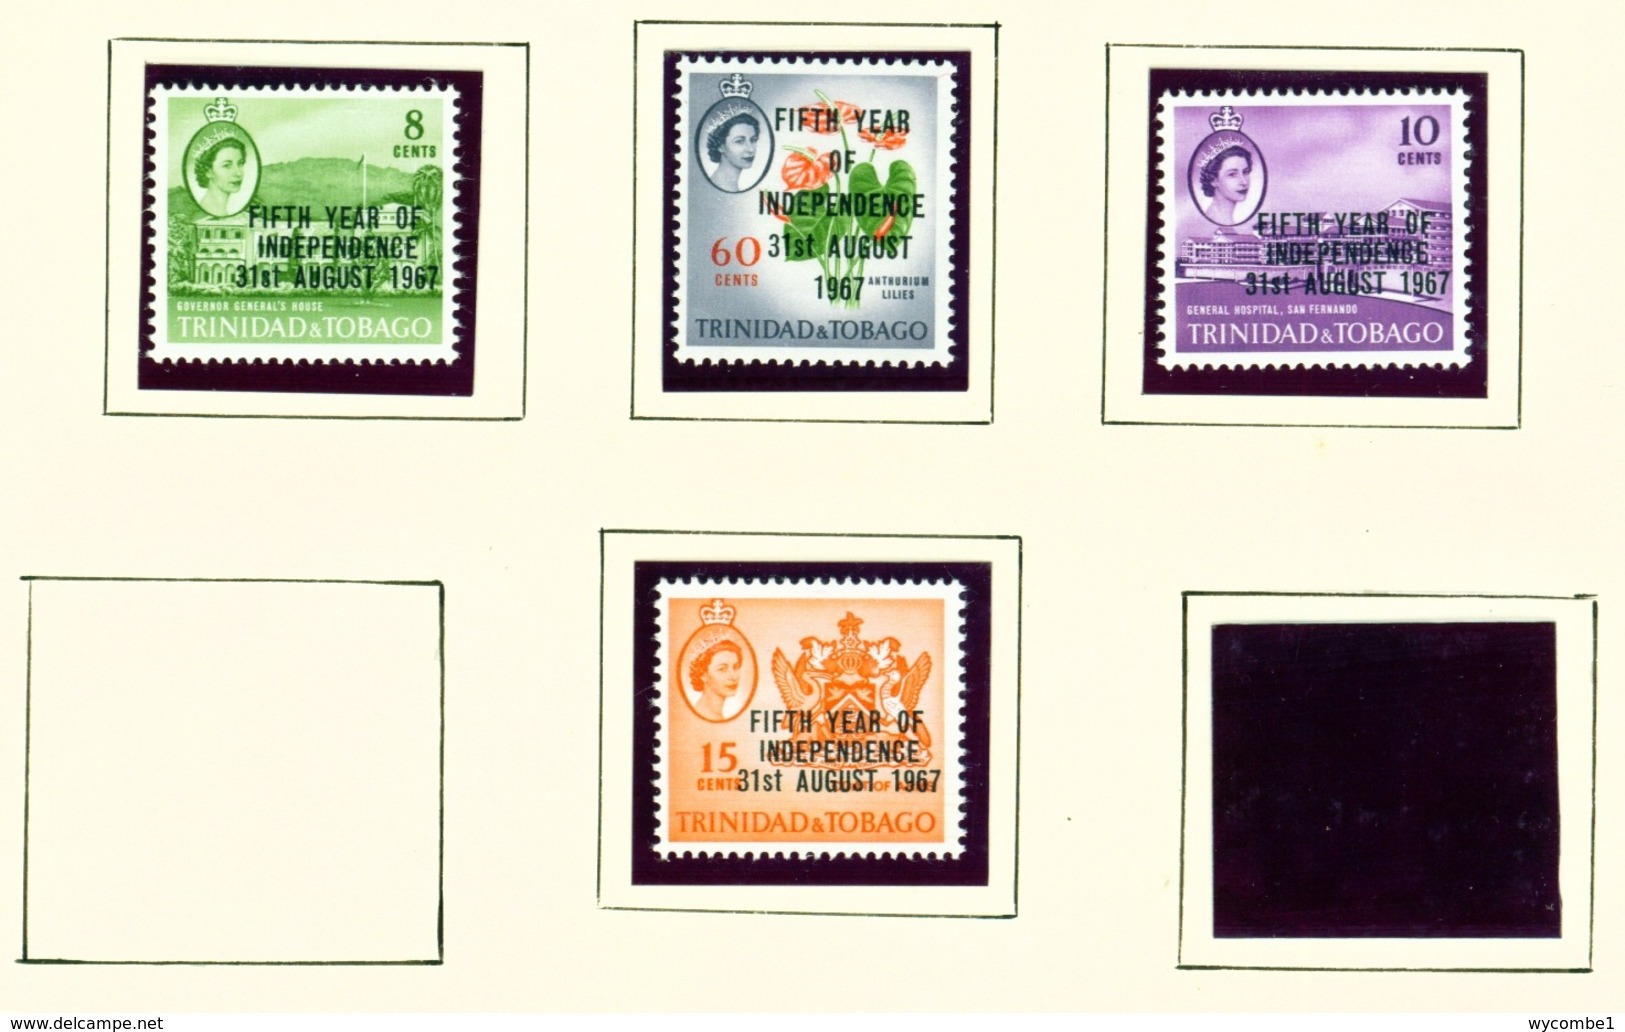 TRINIDAD AND TOBAGO - 1967 Fifth Year Of Independence Set Unmounted/Never Hinged Mint - Trinidad & Tobago (1962-...)